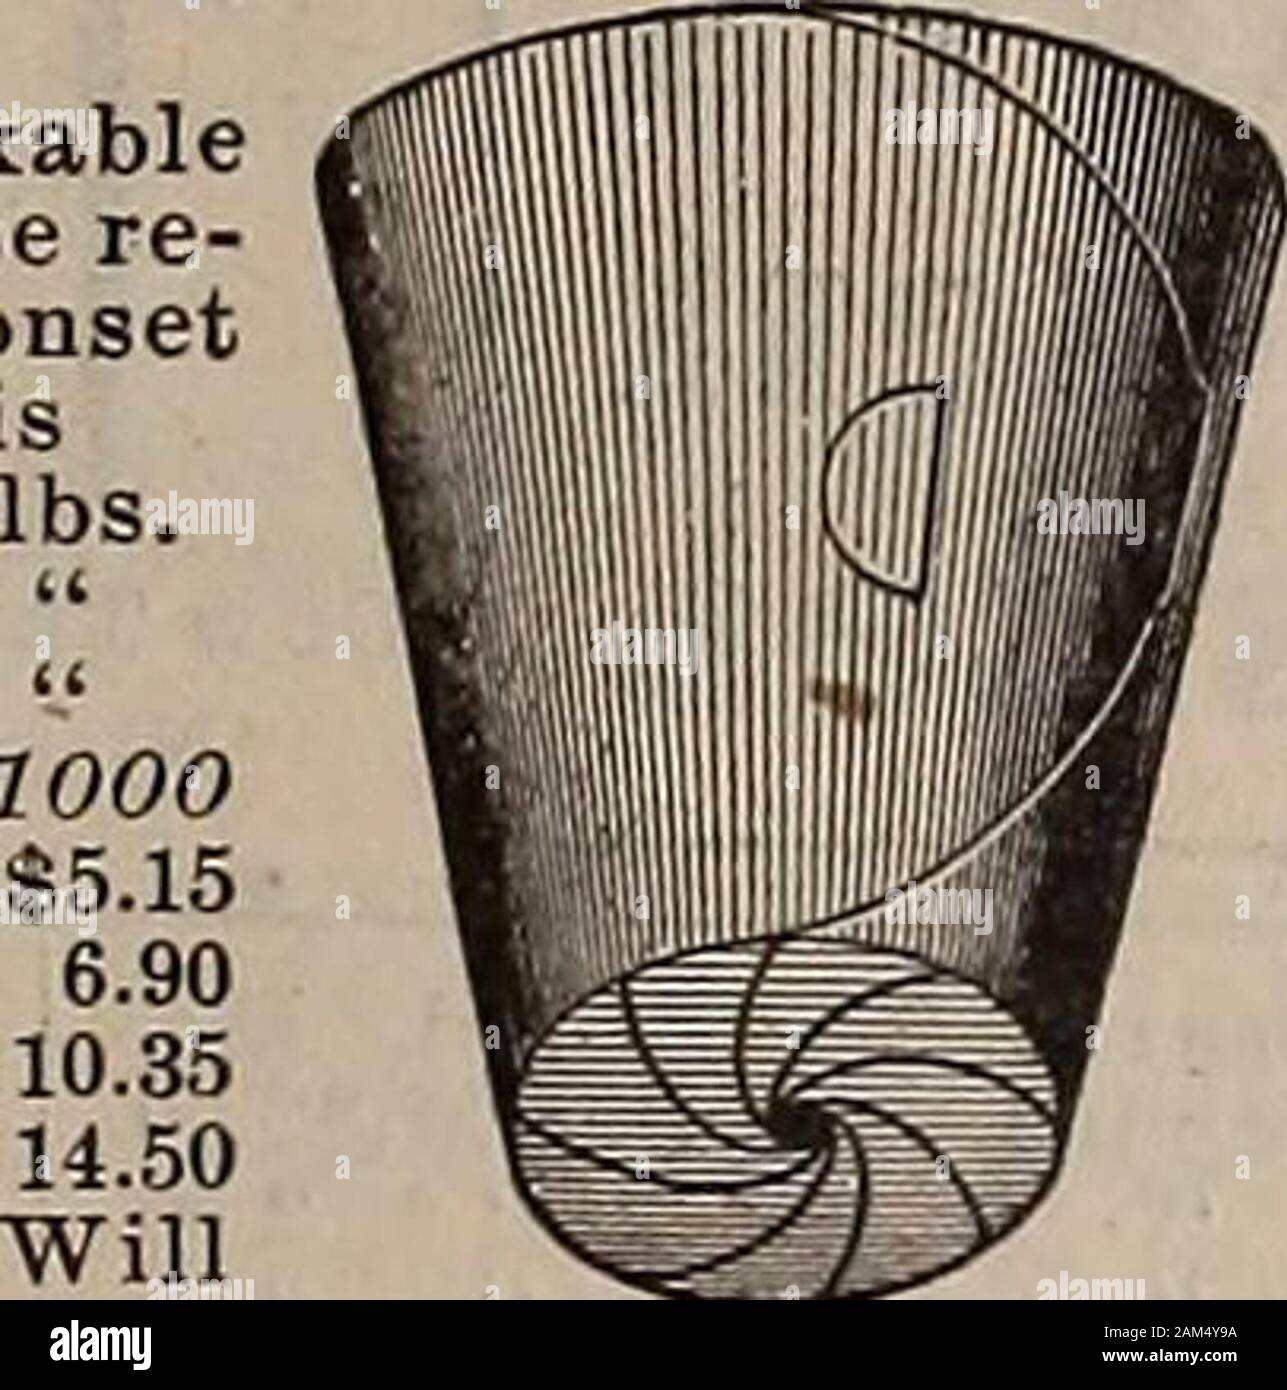 W.WRawson & Coseedsmen / W.WRawson & Co. . POTS. Clay. Standard sizes.Pots. Saucers. Pot and Saucer.Bulb Pot. 3y2x6-in, In. Each. Doz. 100. Each Doz. 700. 2% $0.02 $0.12 $0.80 3 .02 .17 1.00 4 .03 .30 1.75 $0.02 $0.20 $1.30 5 .04 .40 2.90 .03 .25 1.65 6 .06. .65 4.35 .04 .35 2.20 7 .09 1.00 7.20 .05 .45 2.90 8 .12 1.25 9.45 .06 .60 4.35 9 .15 1.75 13.50 .07 .70 5.25 10 .25 2.40 17.00 .08 .90 6.75 11 .30 3.25 22.50 .10 1.10 8.15 12 .40 4.25 .15 1.50 10.00 13 .70 .20 14 .90 .25 15 1.35 .30 doz. 8 cts. each; 75 cts.100: 5-iii. 9 cts.each; 95 cts. doz.: $7.00 100.IVeponset Fibre Pot. Absolutely un Stock Photo